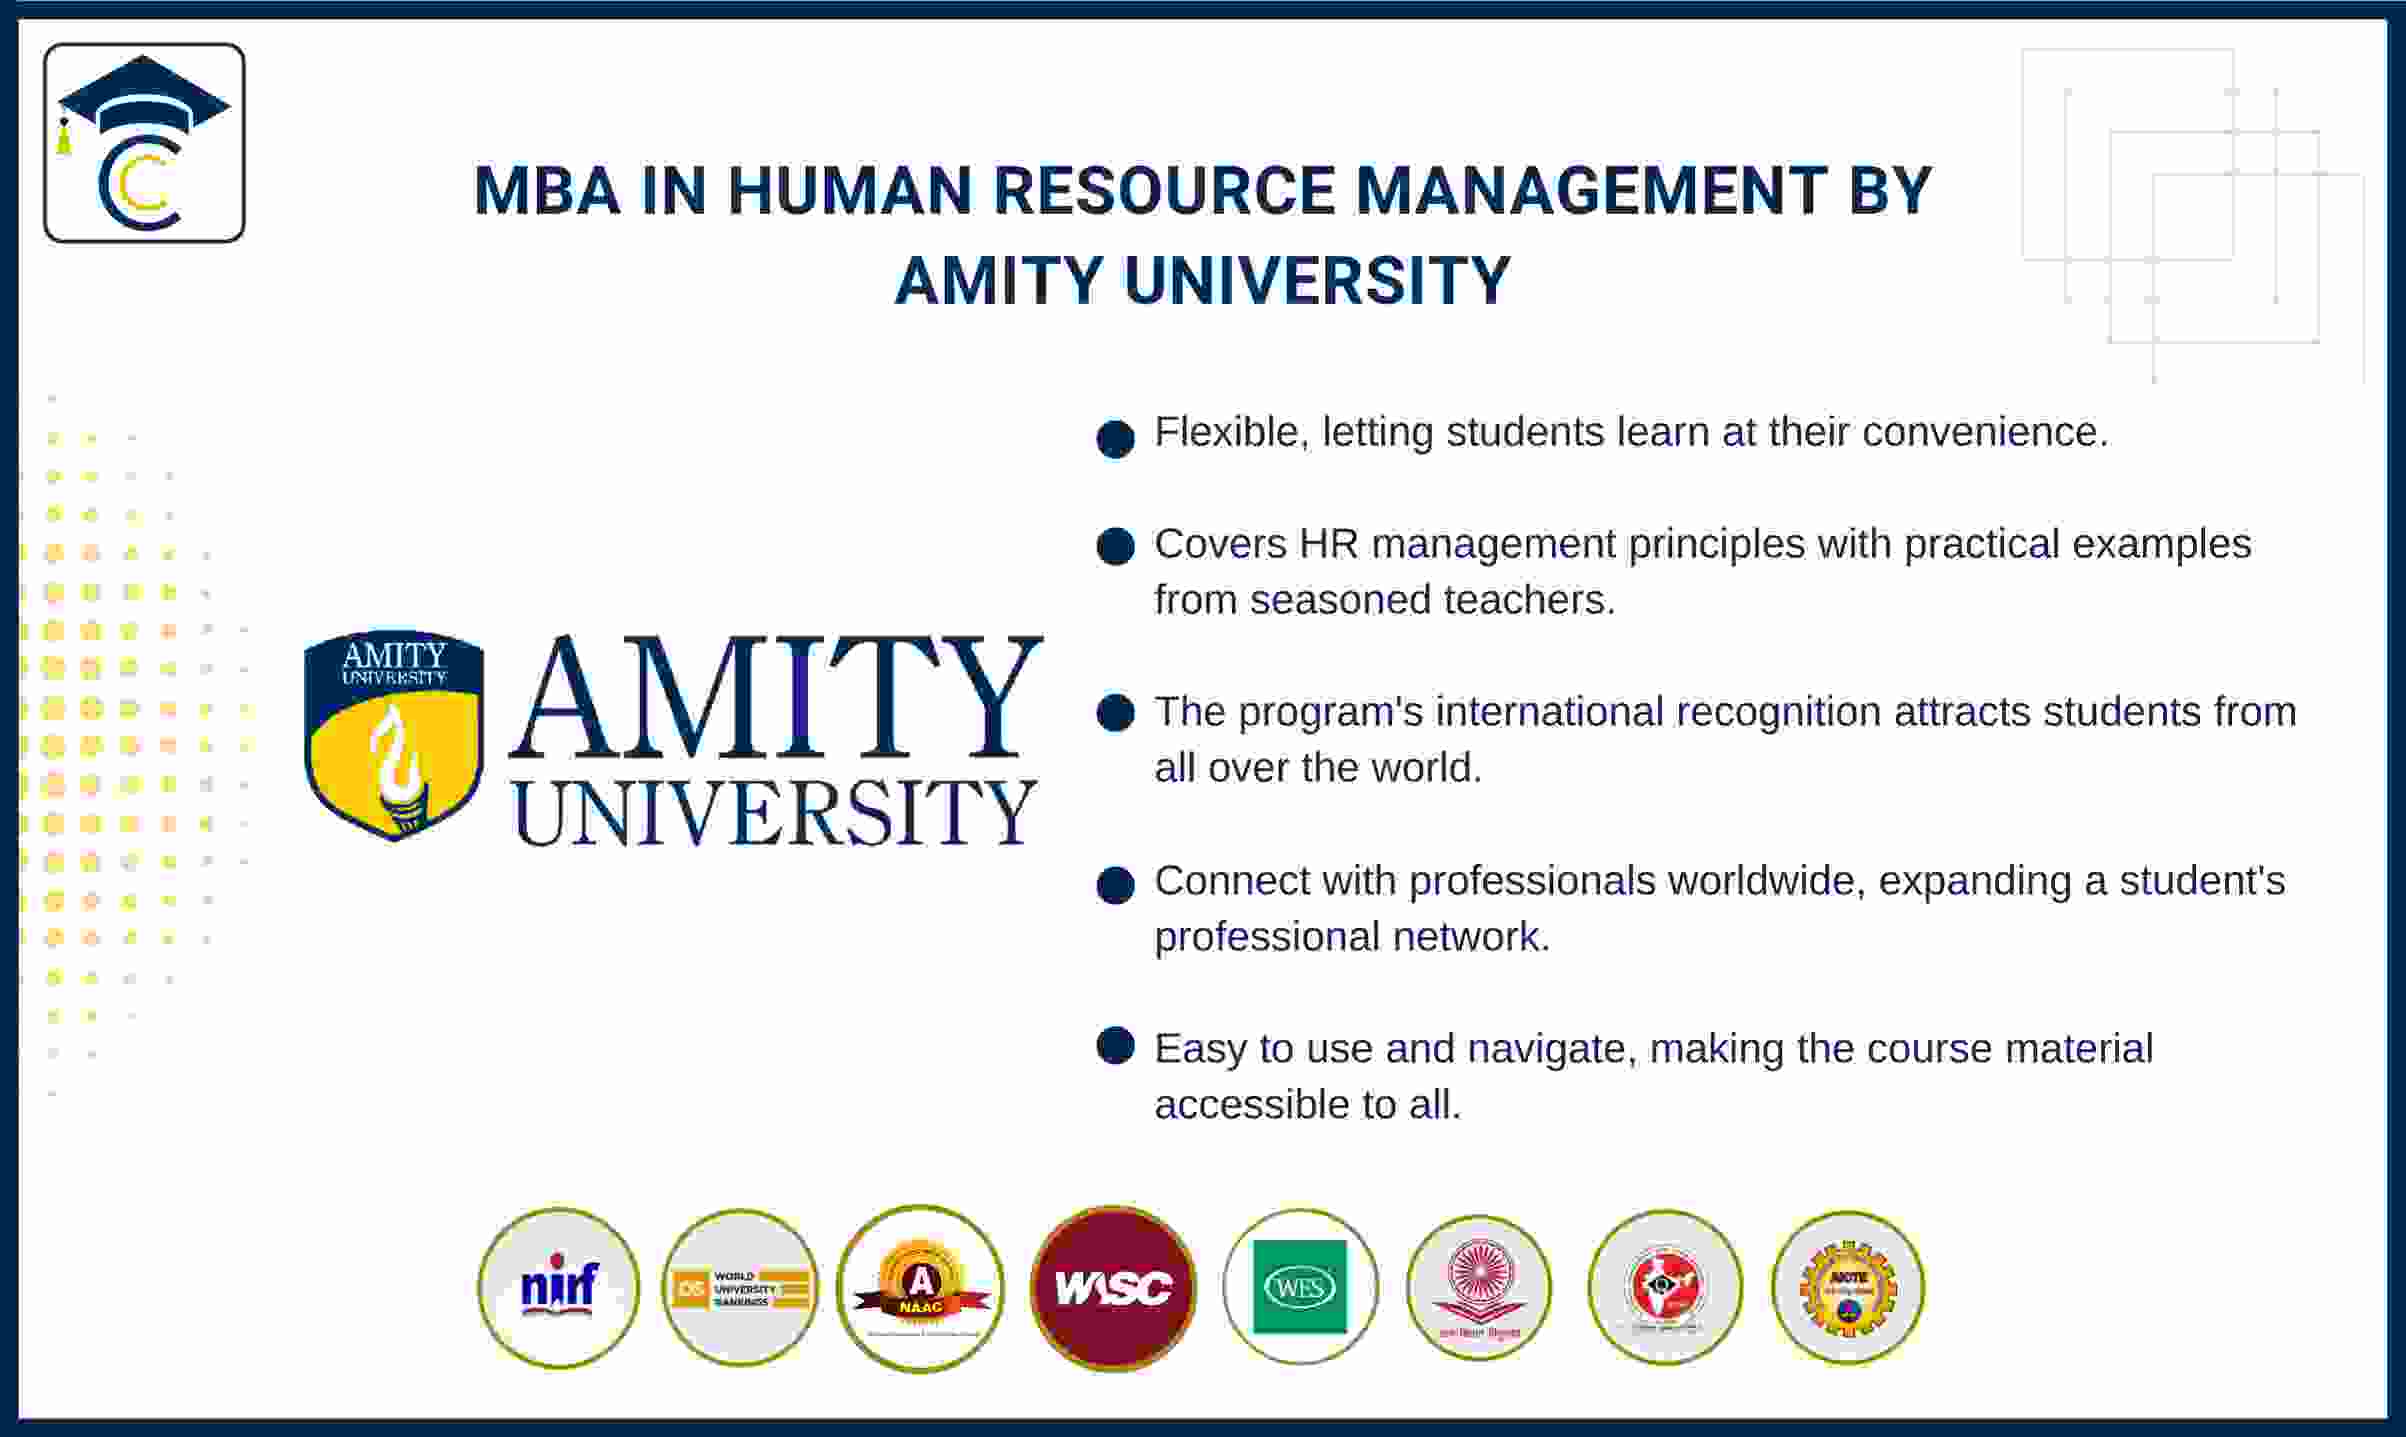 mba-in-human-resource-management-amity-university